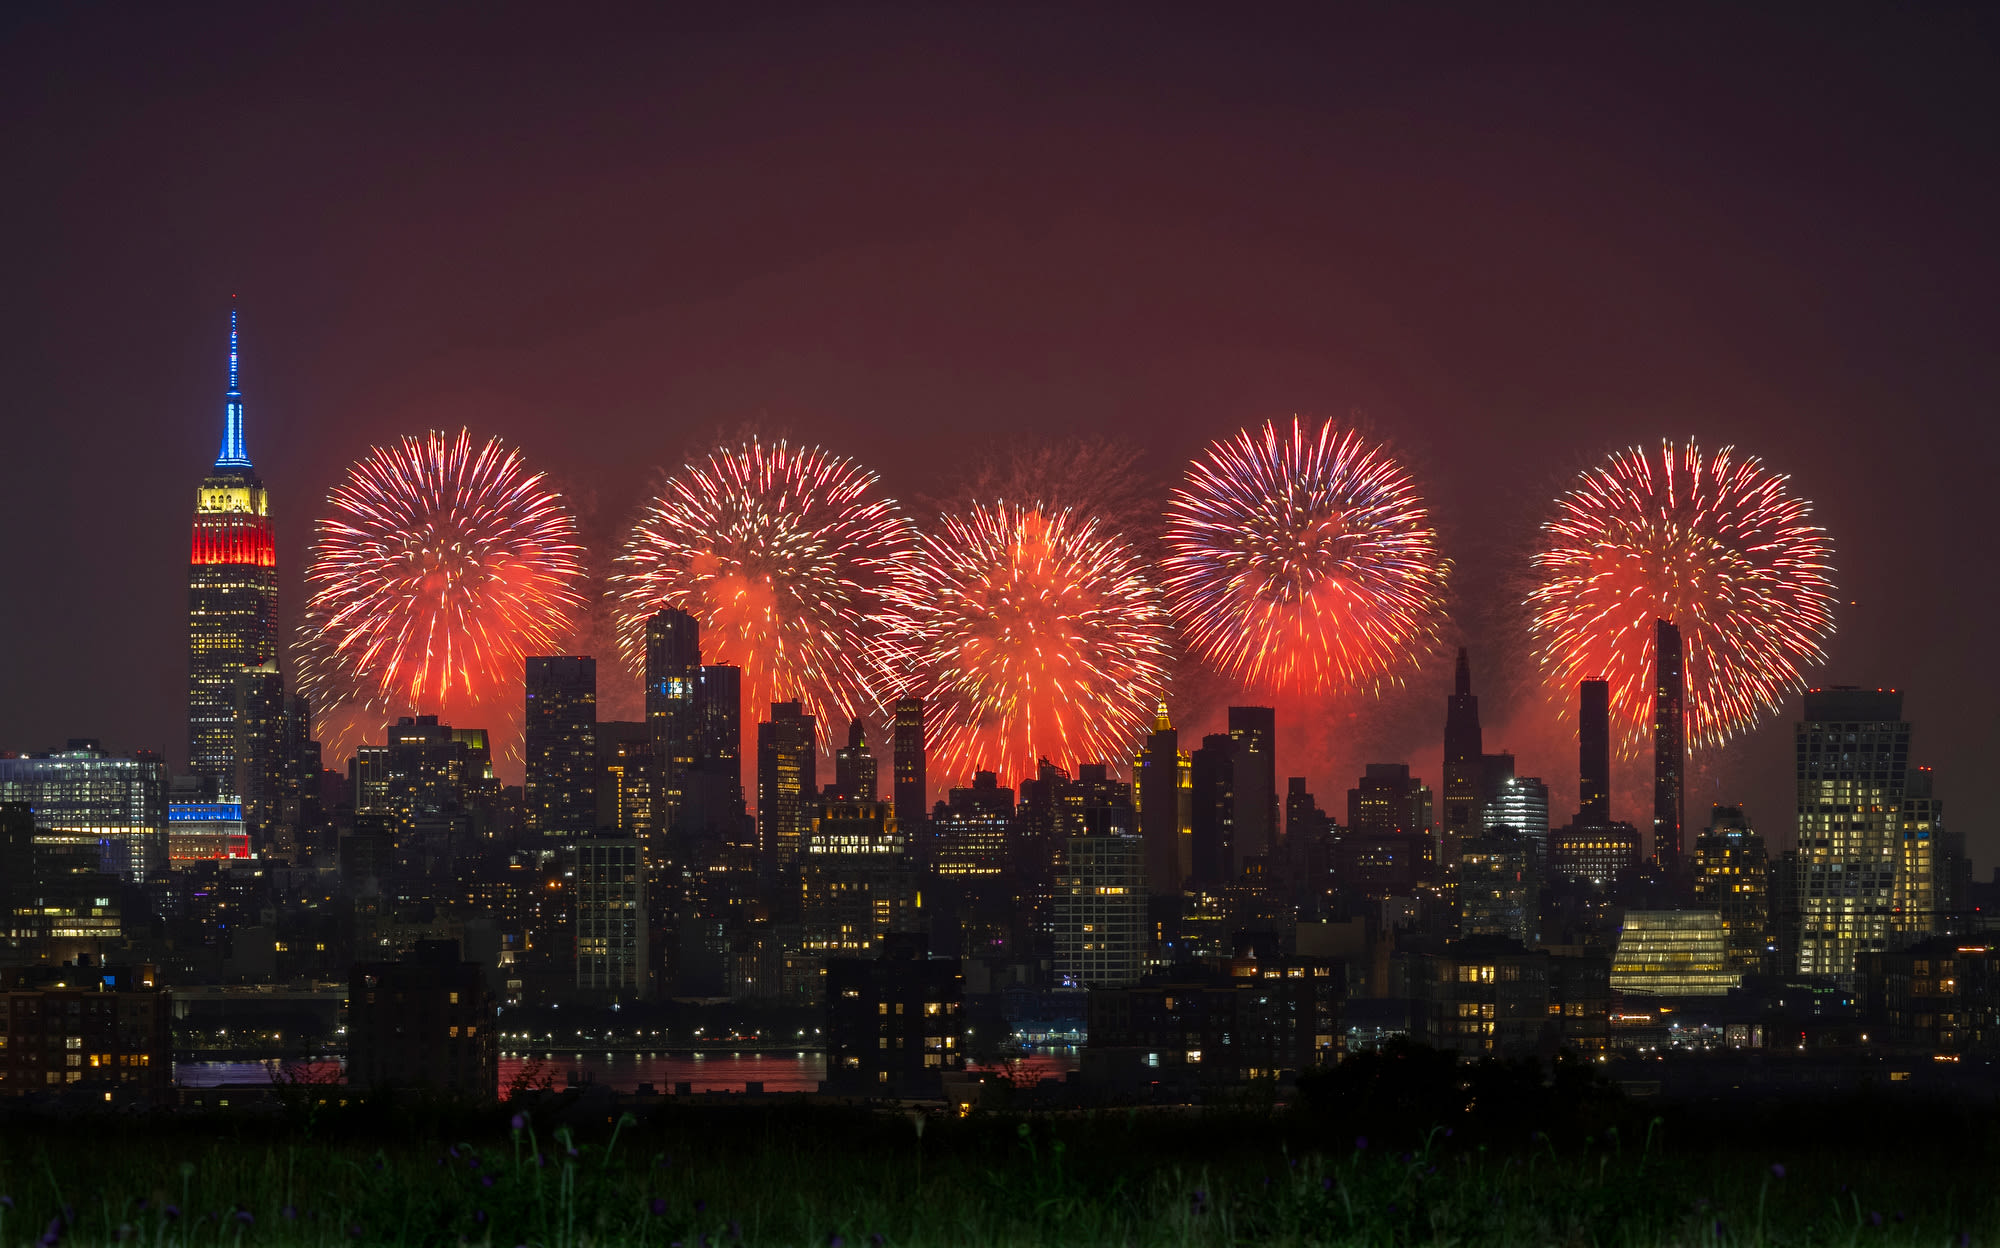 Macy’s 4th of July Fireworks in NYC Move to New Location, After 11 Years